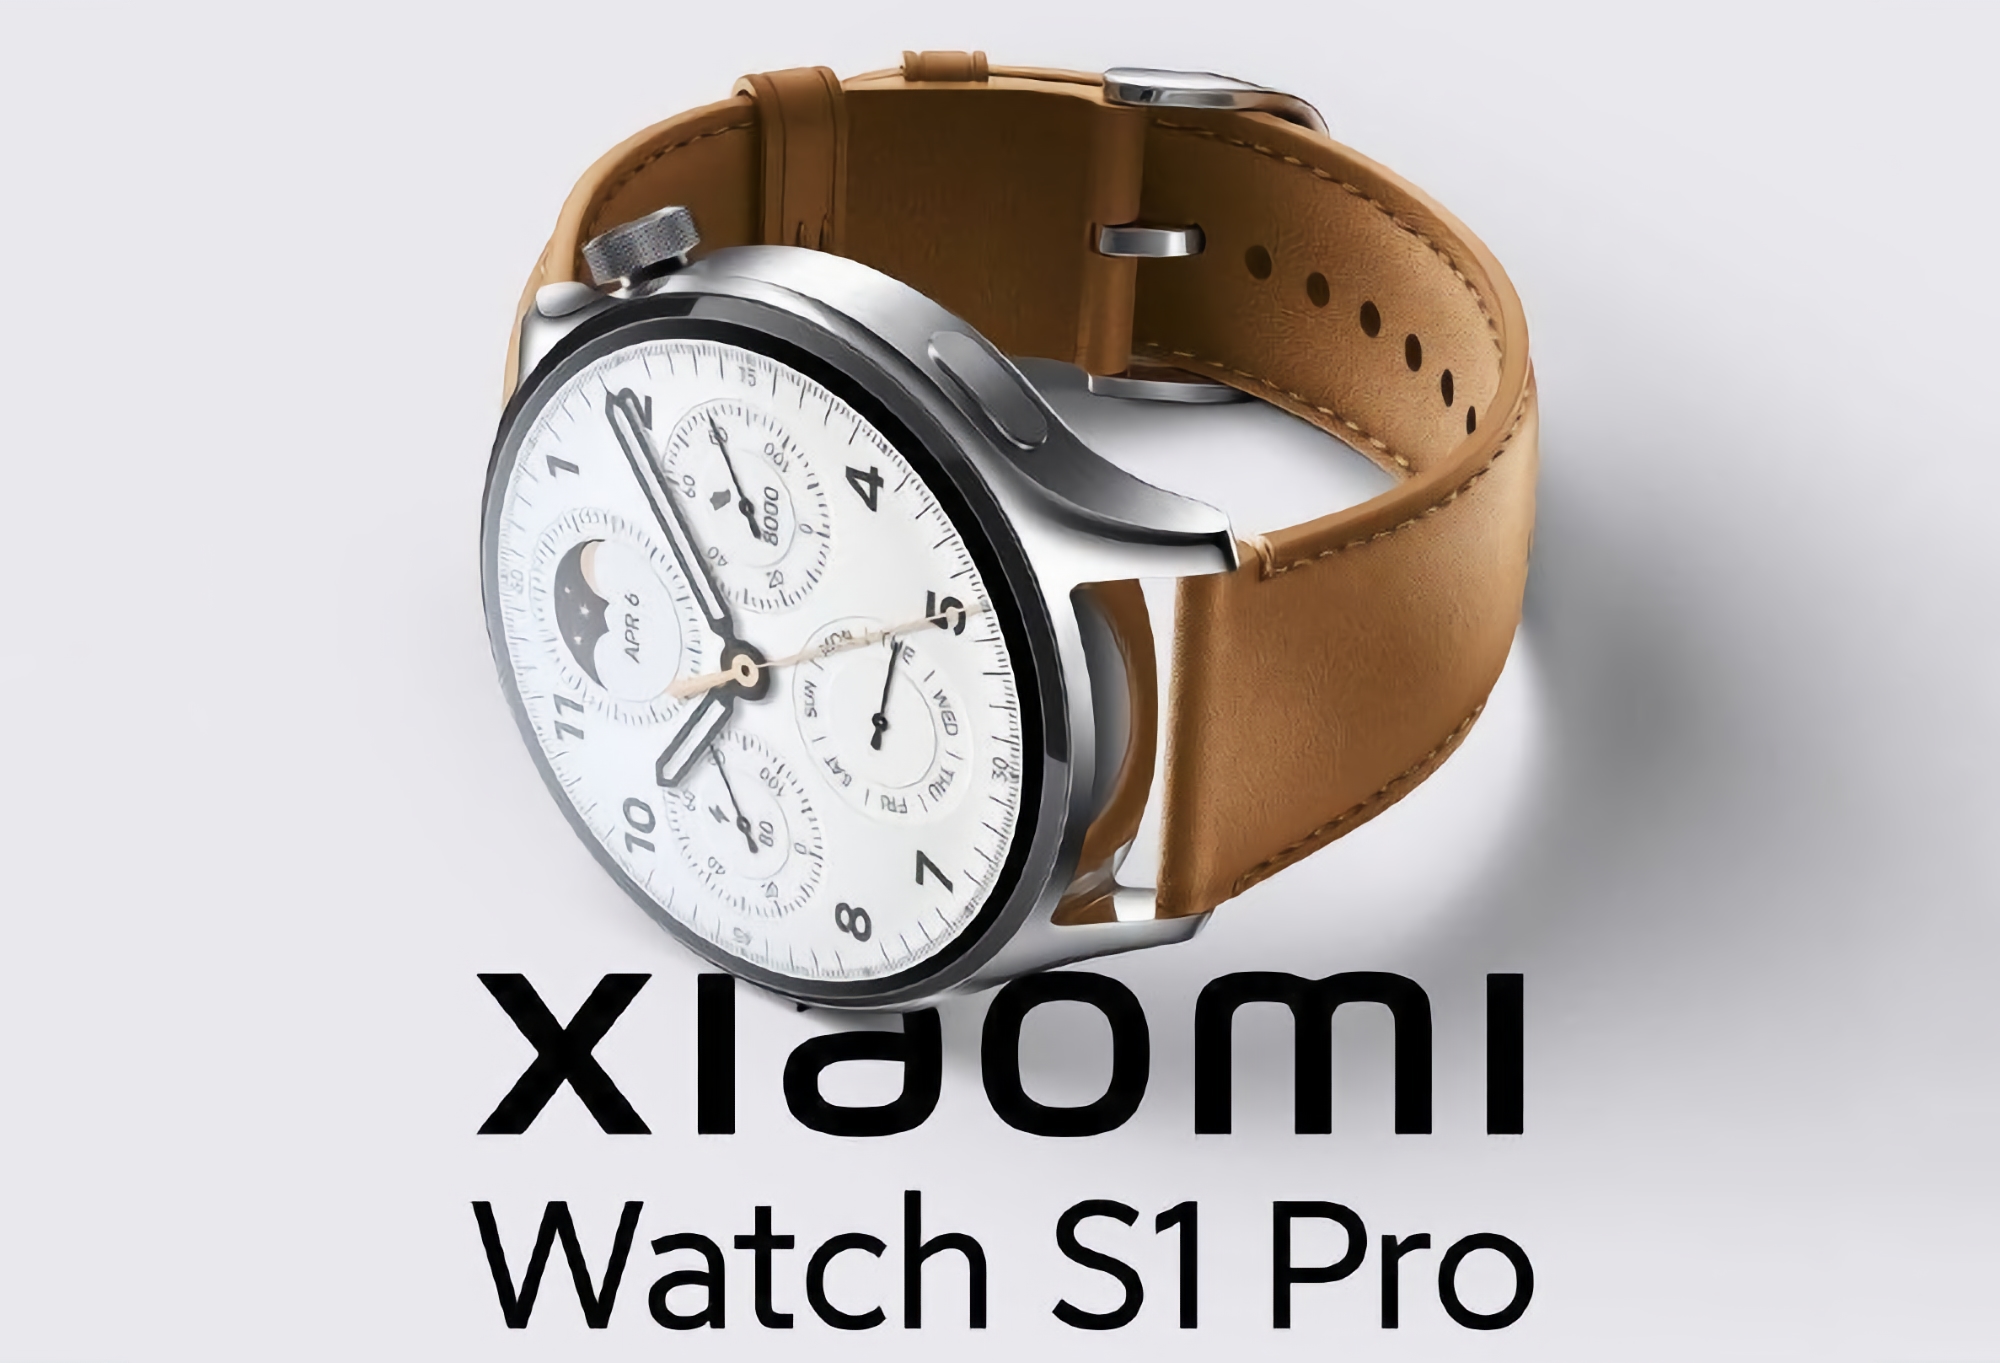 Another new product: Xiaomi will unveil the Watch S1 Pro smartwatch on August 11, this is what it will look like